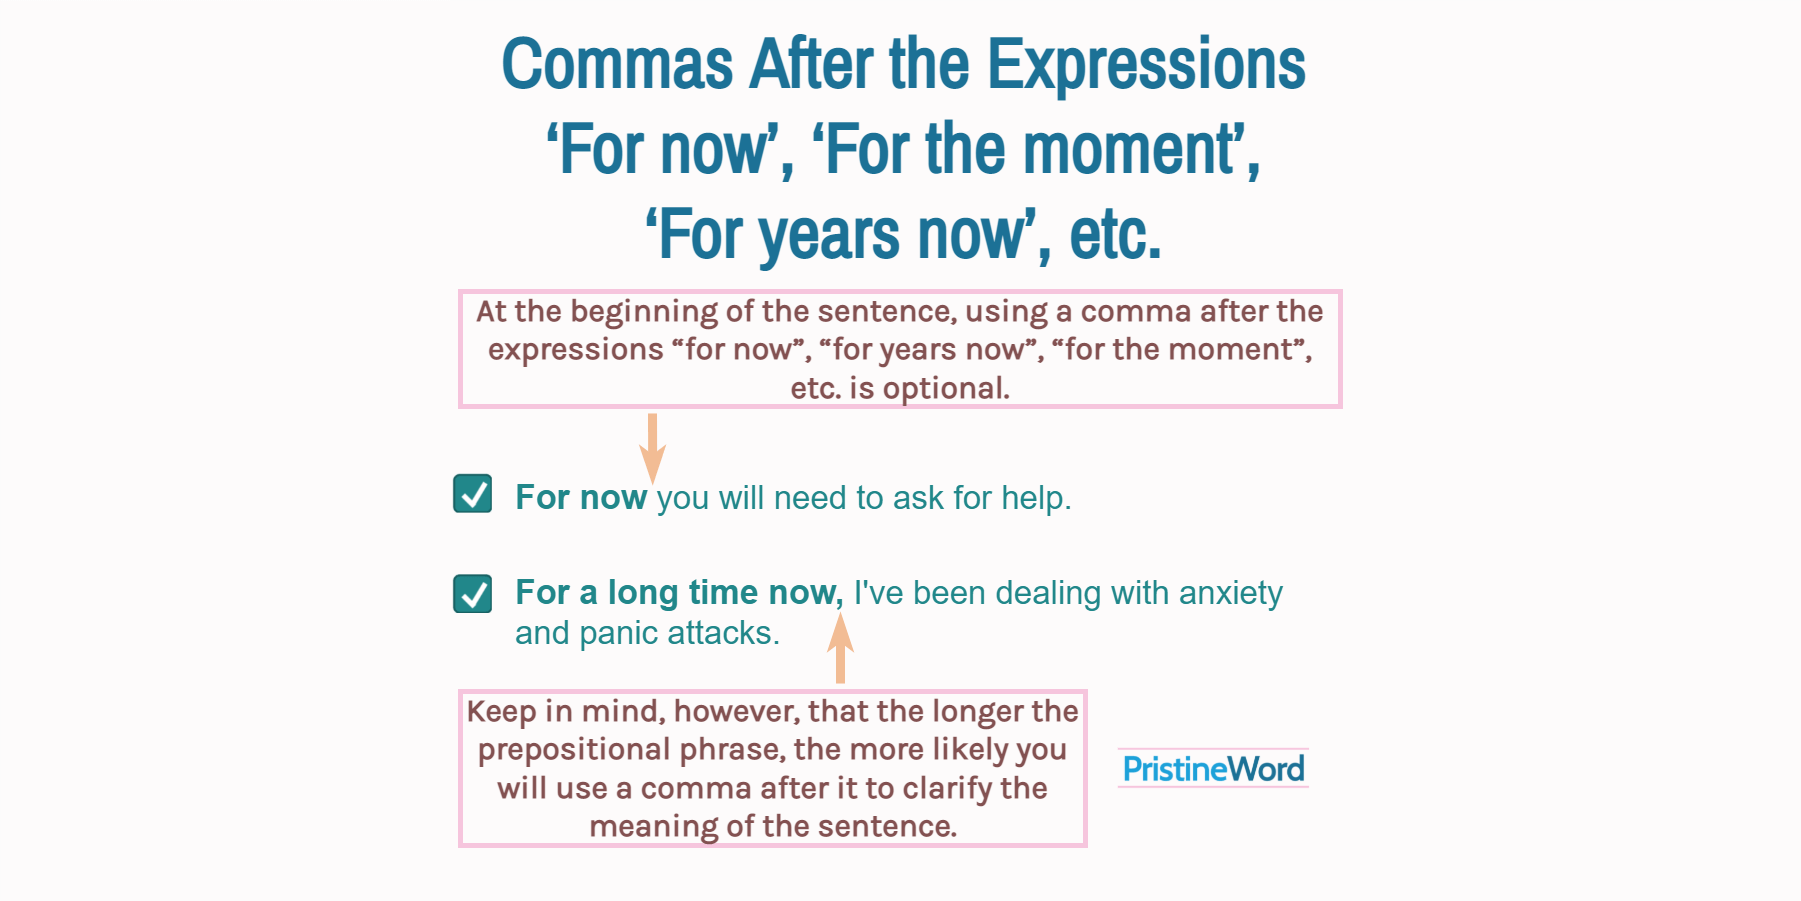 When to use a Comma After ‘For now’, ‘For the moment’, ‘For years now’, etc.